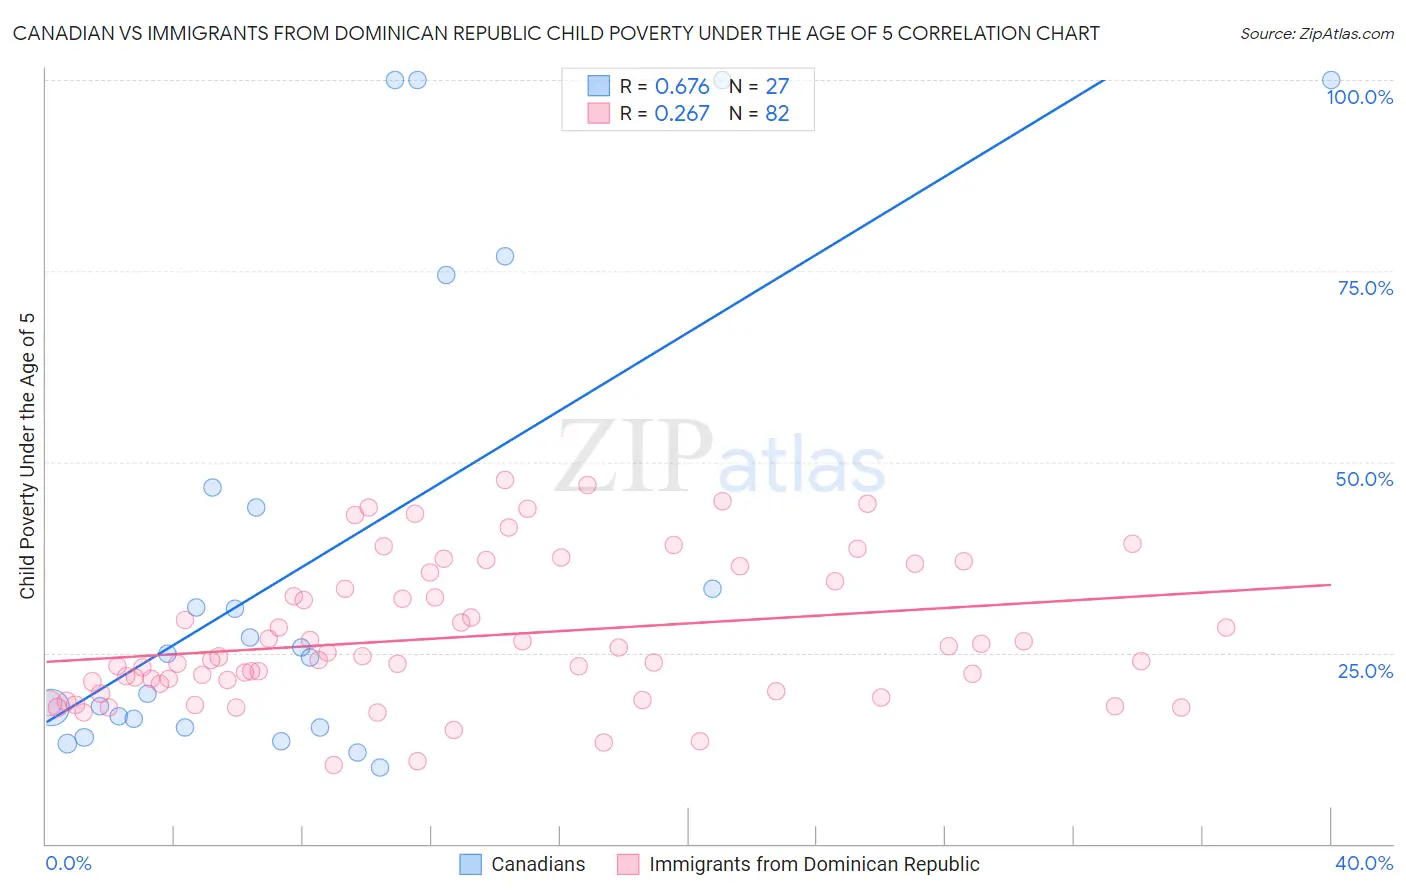 Canadian vs Immigrants from Dominican Republic Child Poverty Under the Age of 5